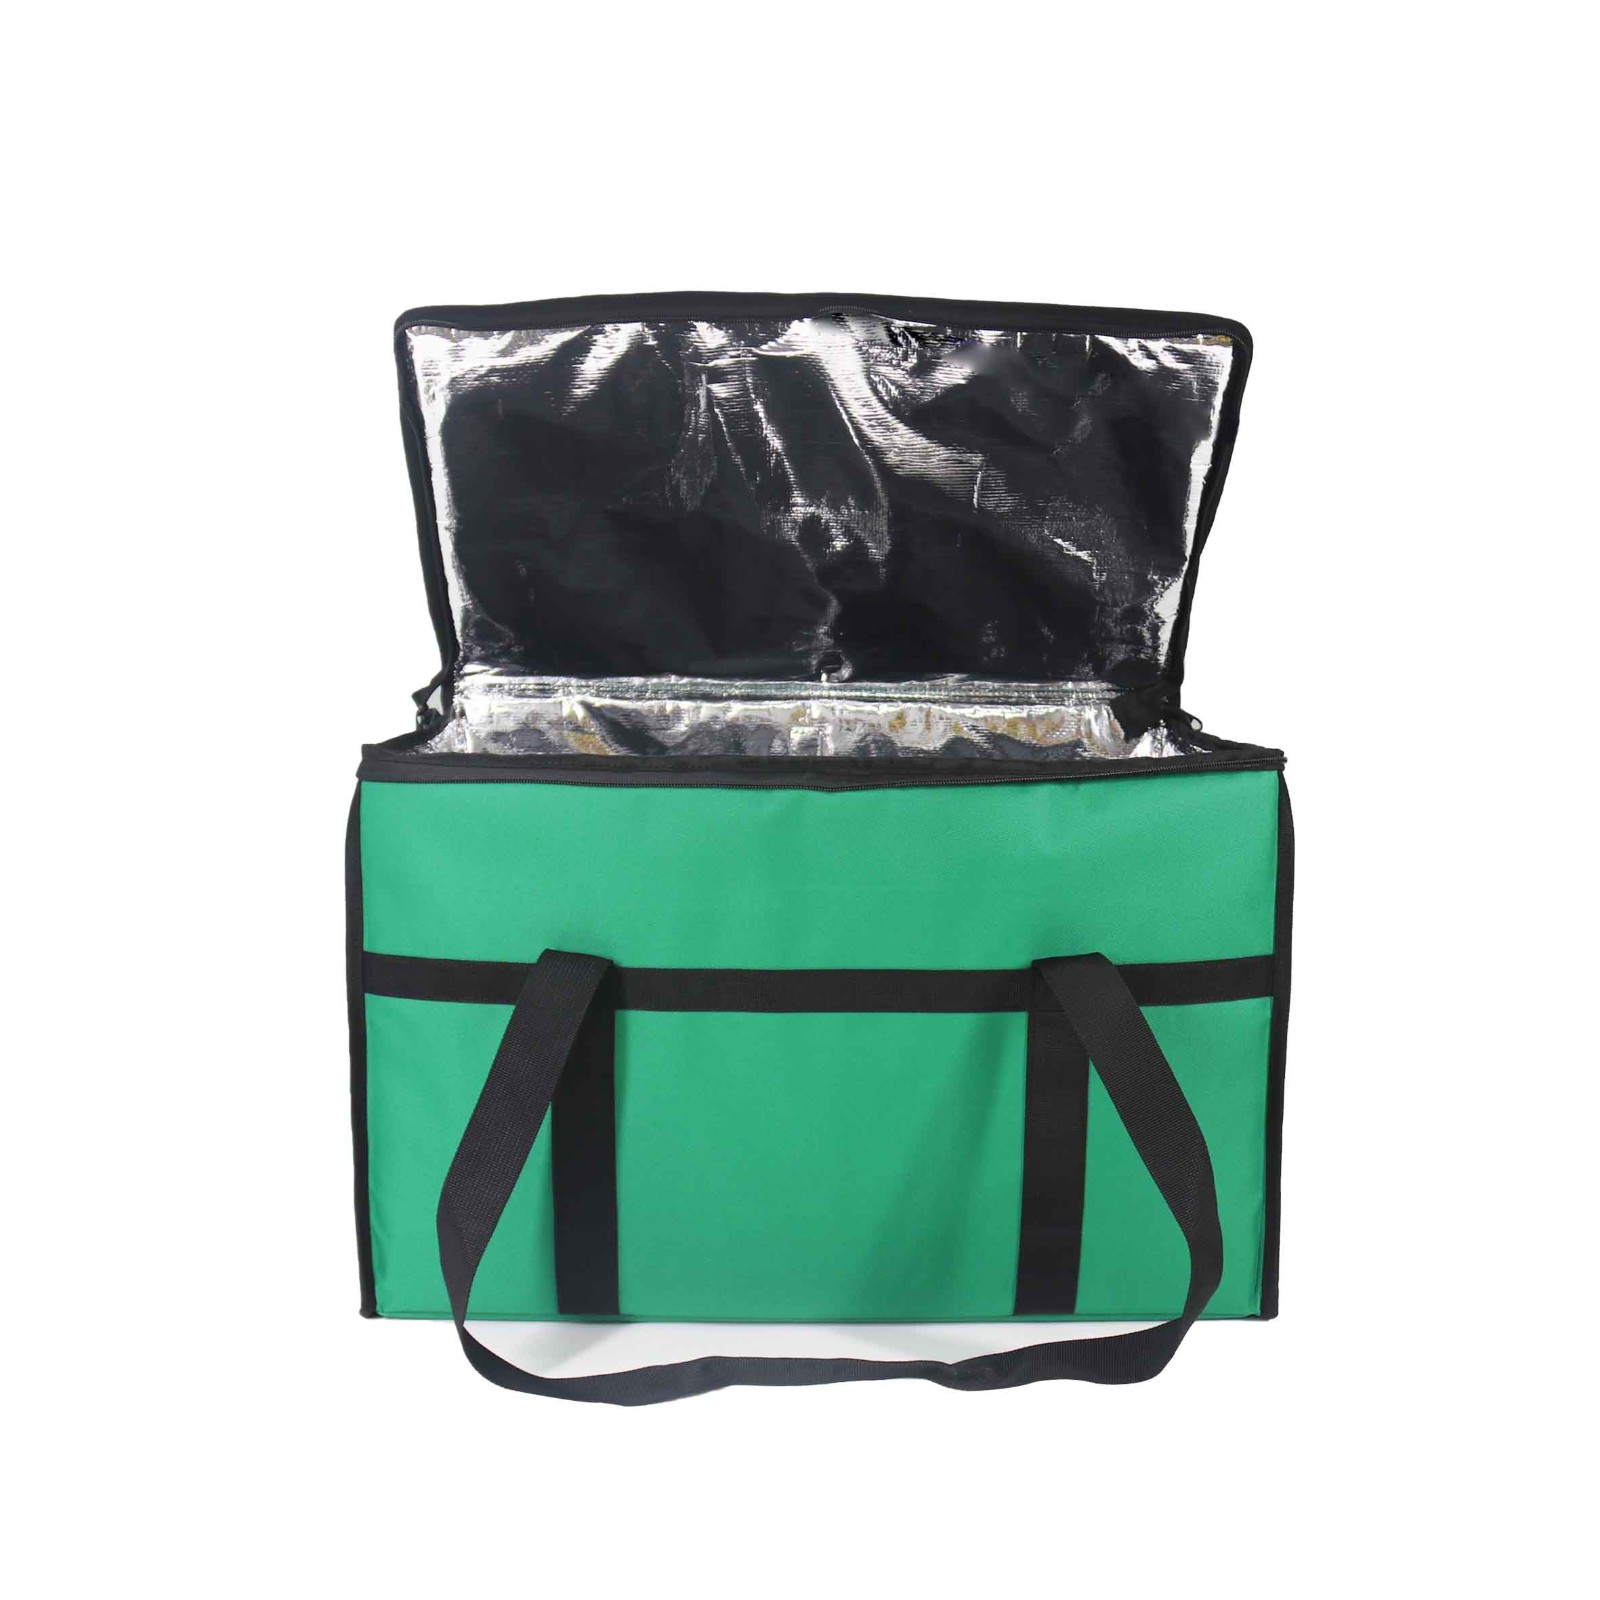 Professional Thermal Food Delivery Tote Bag - Waterproof and Durable